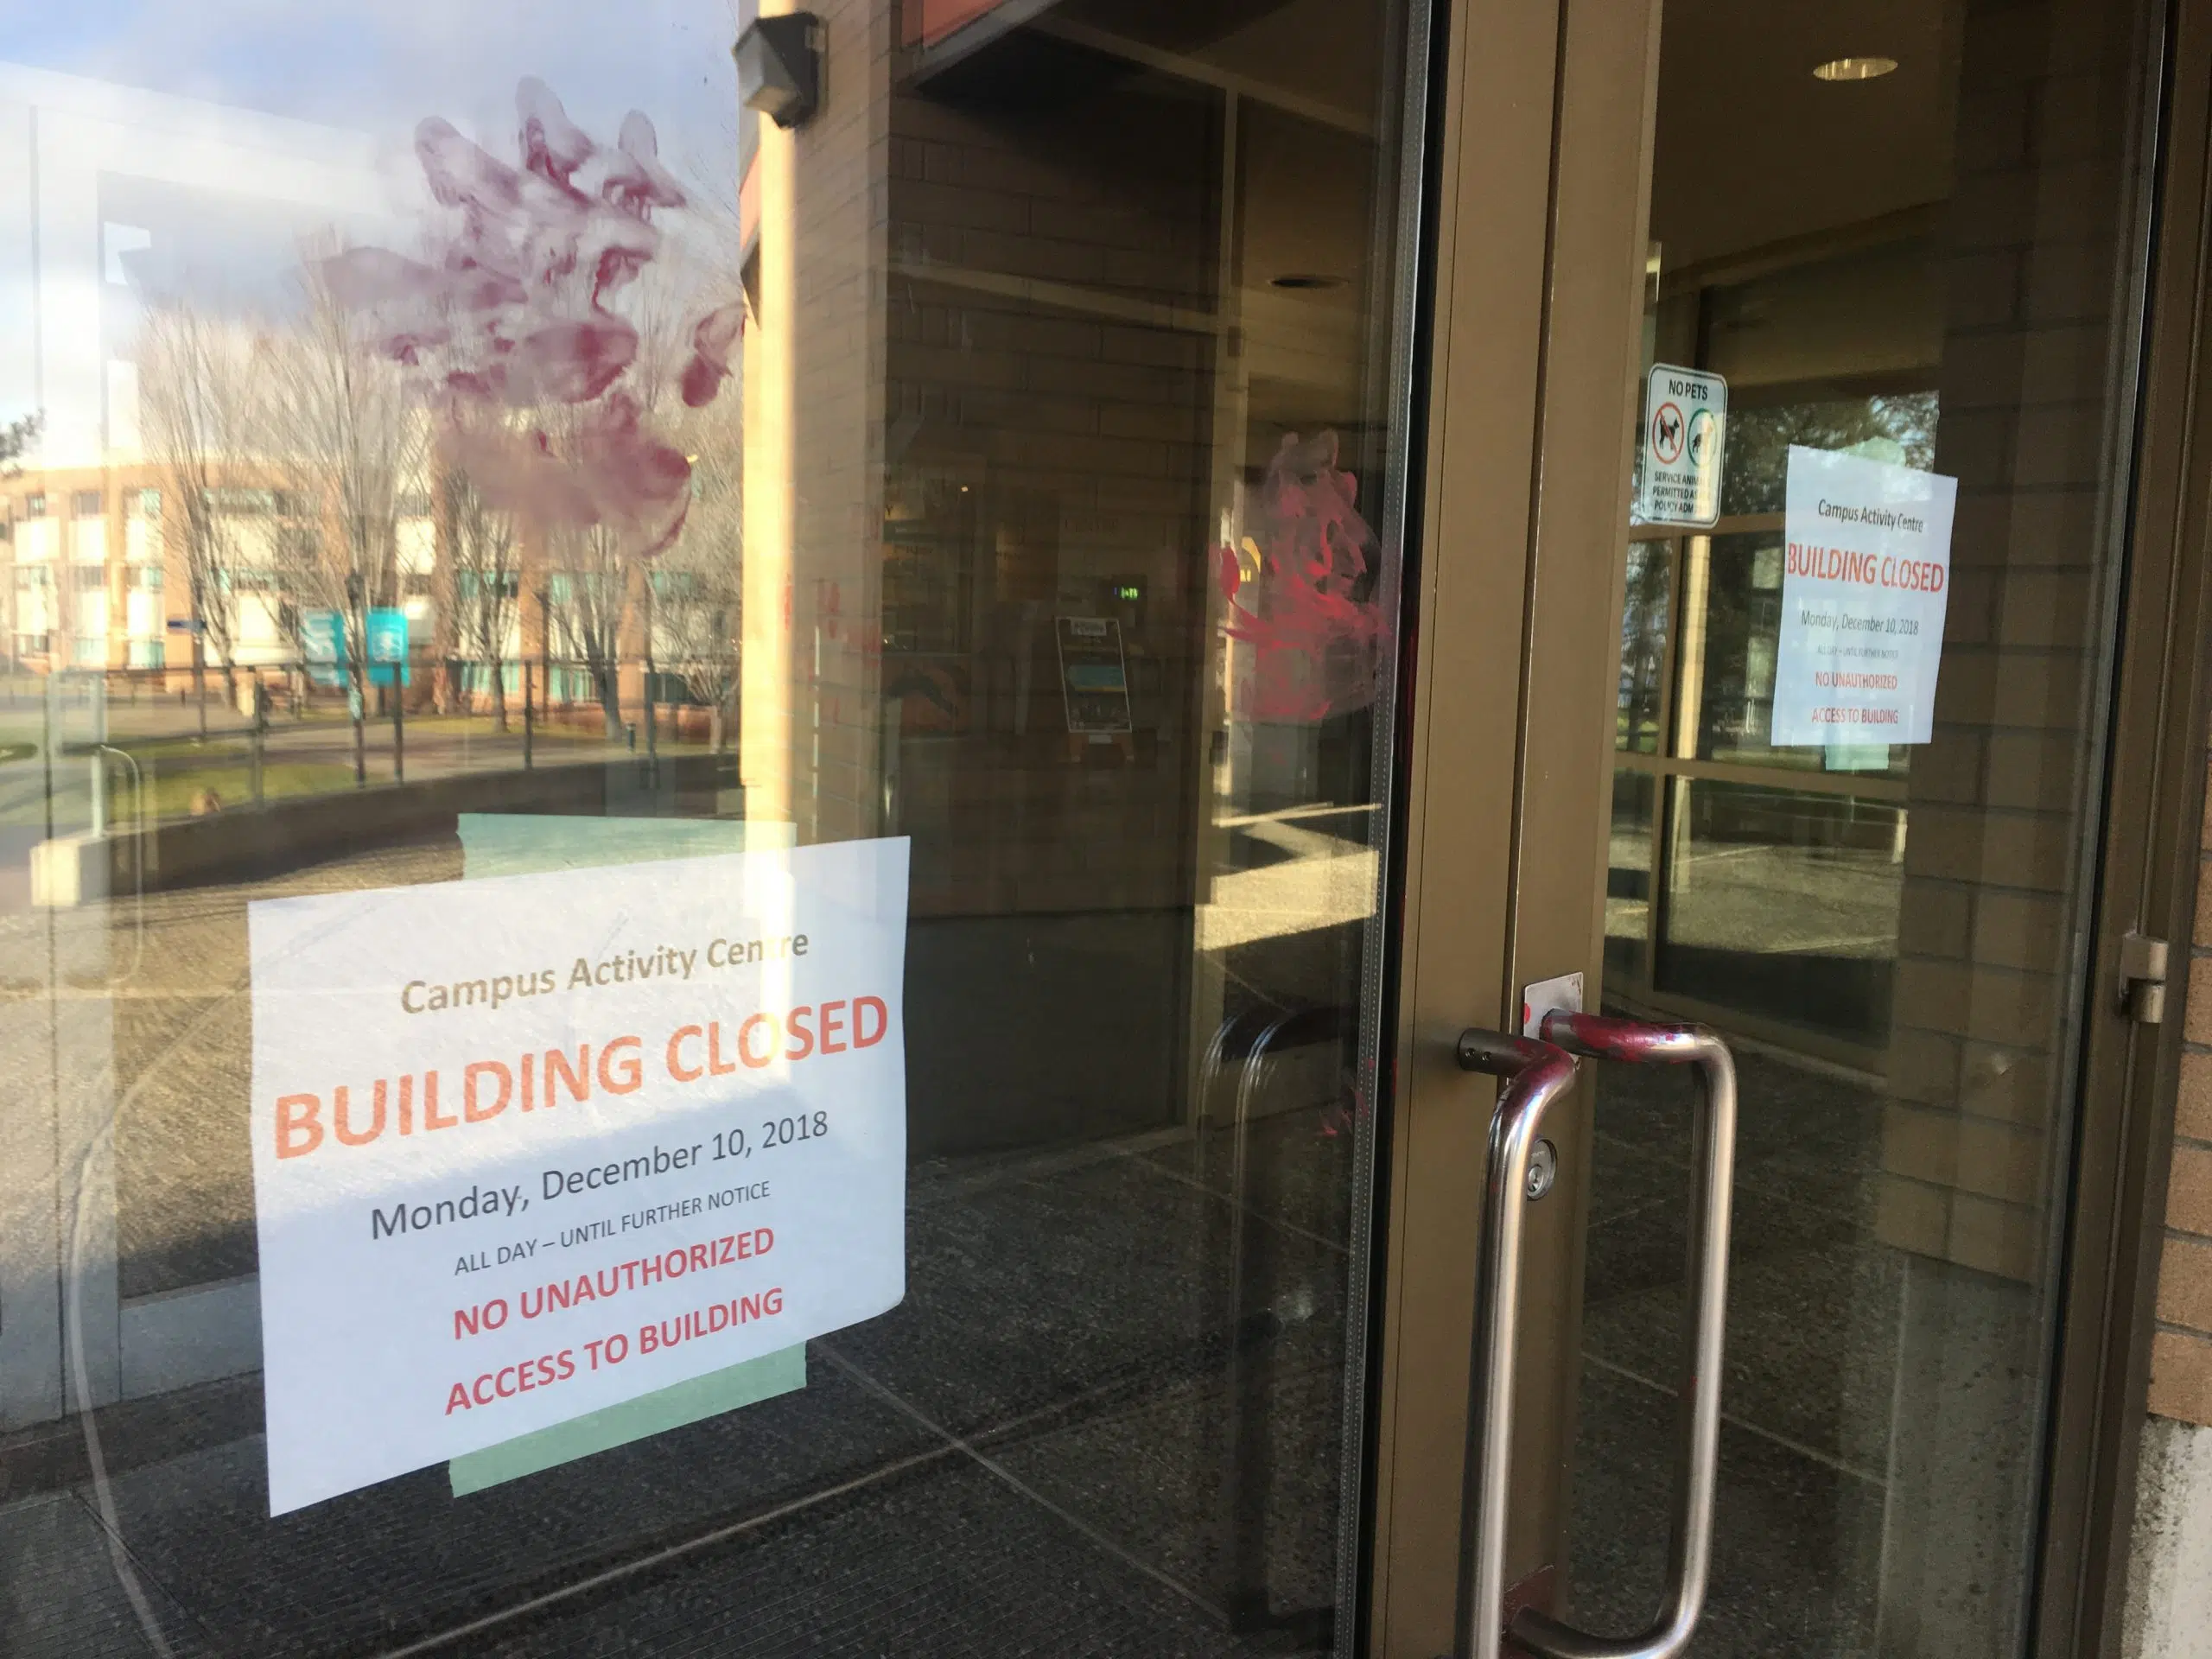 UPDATE: Three protesters arrested on TRU campus after vandalism to building, assault on guards